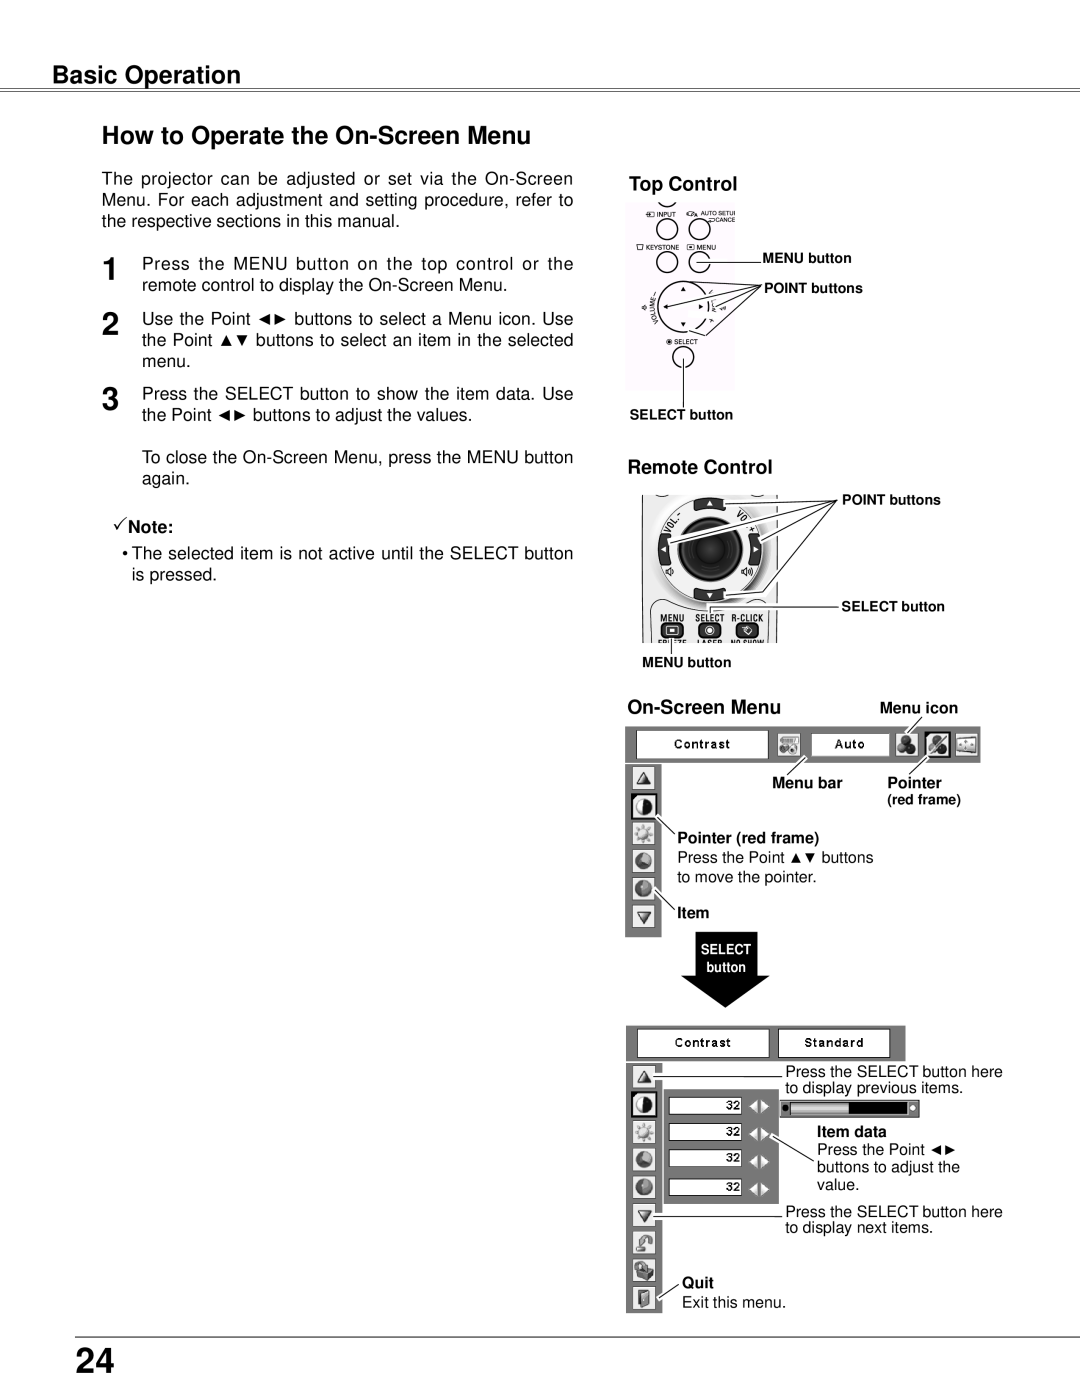 Eiki LC-XB42N owner manual Basic Operation How to Operate the On-Screen Menu, Top Control, Remote Control 